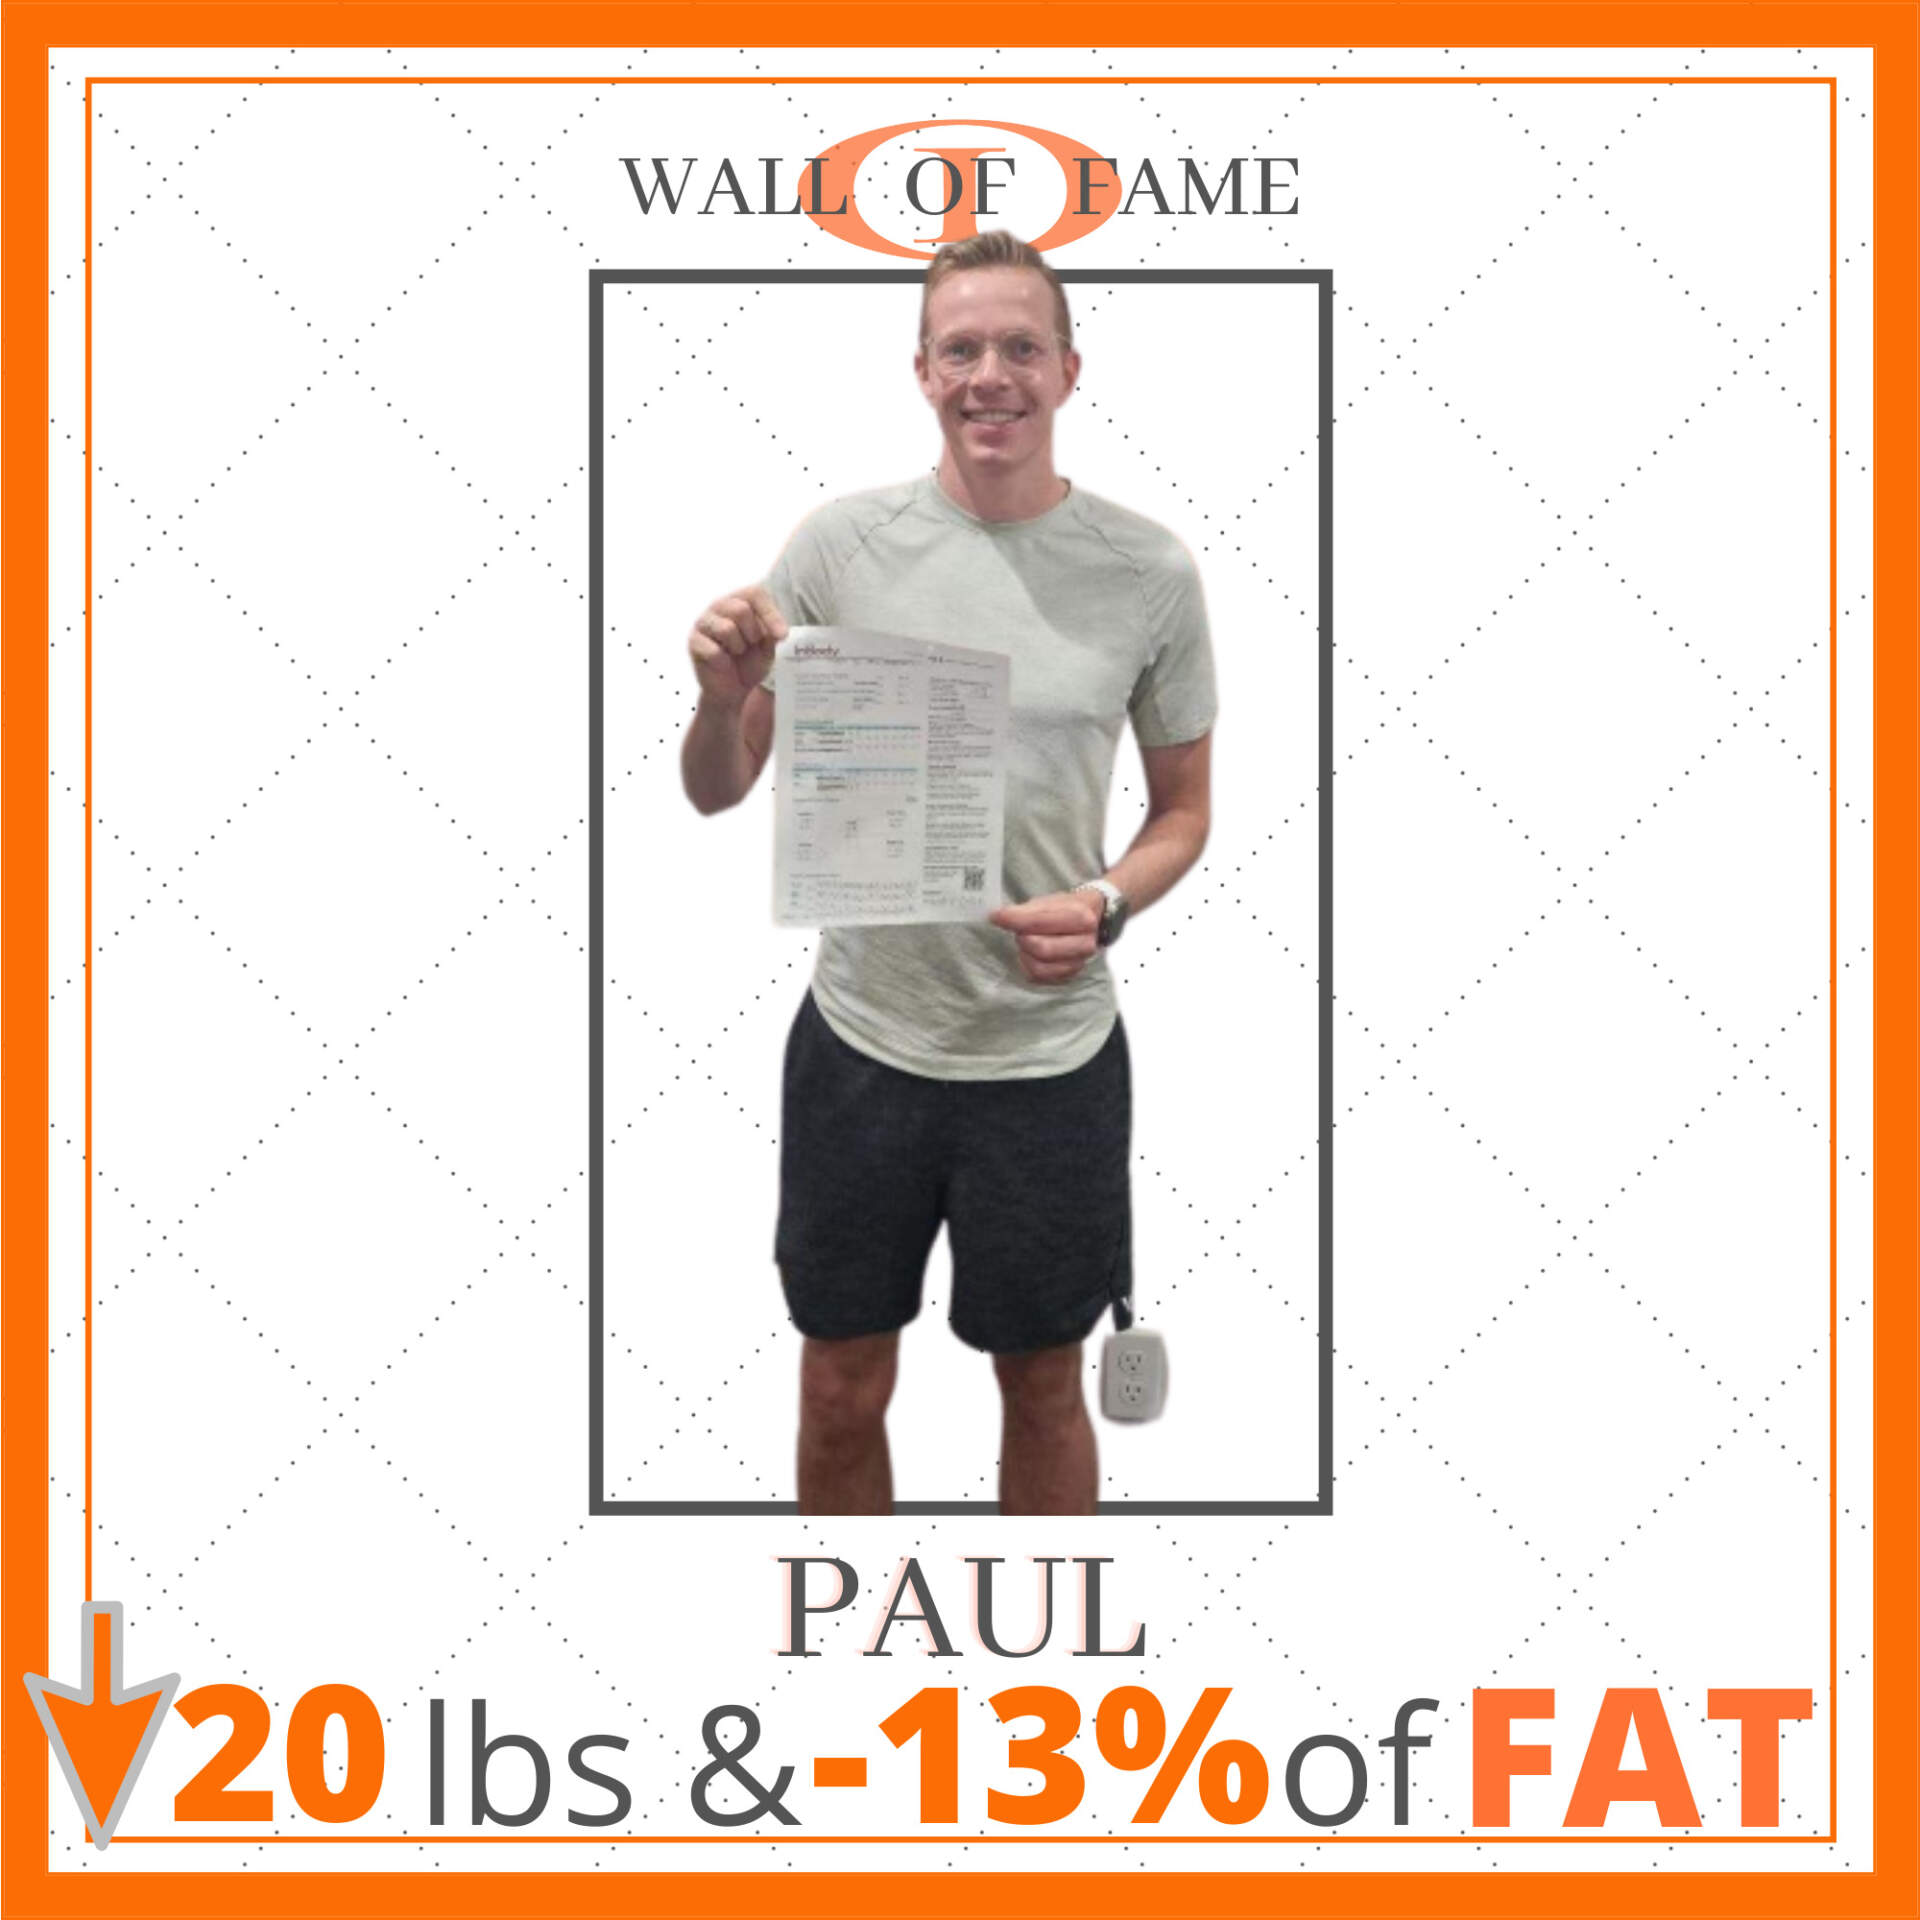 Paul's Remarkable Fitness Journey with Iron Orr Fitness